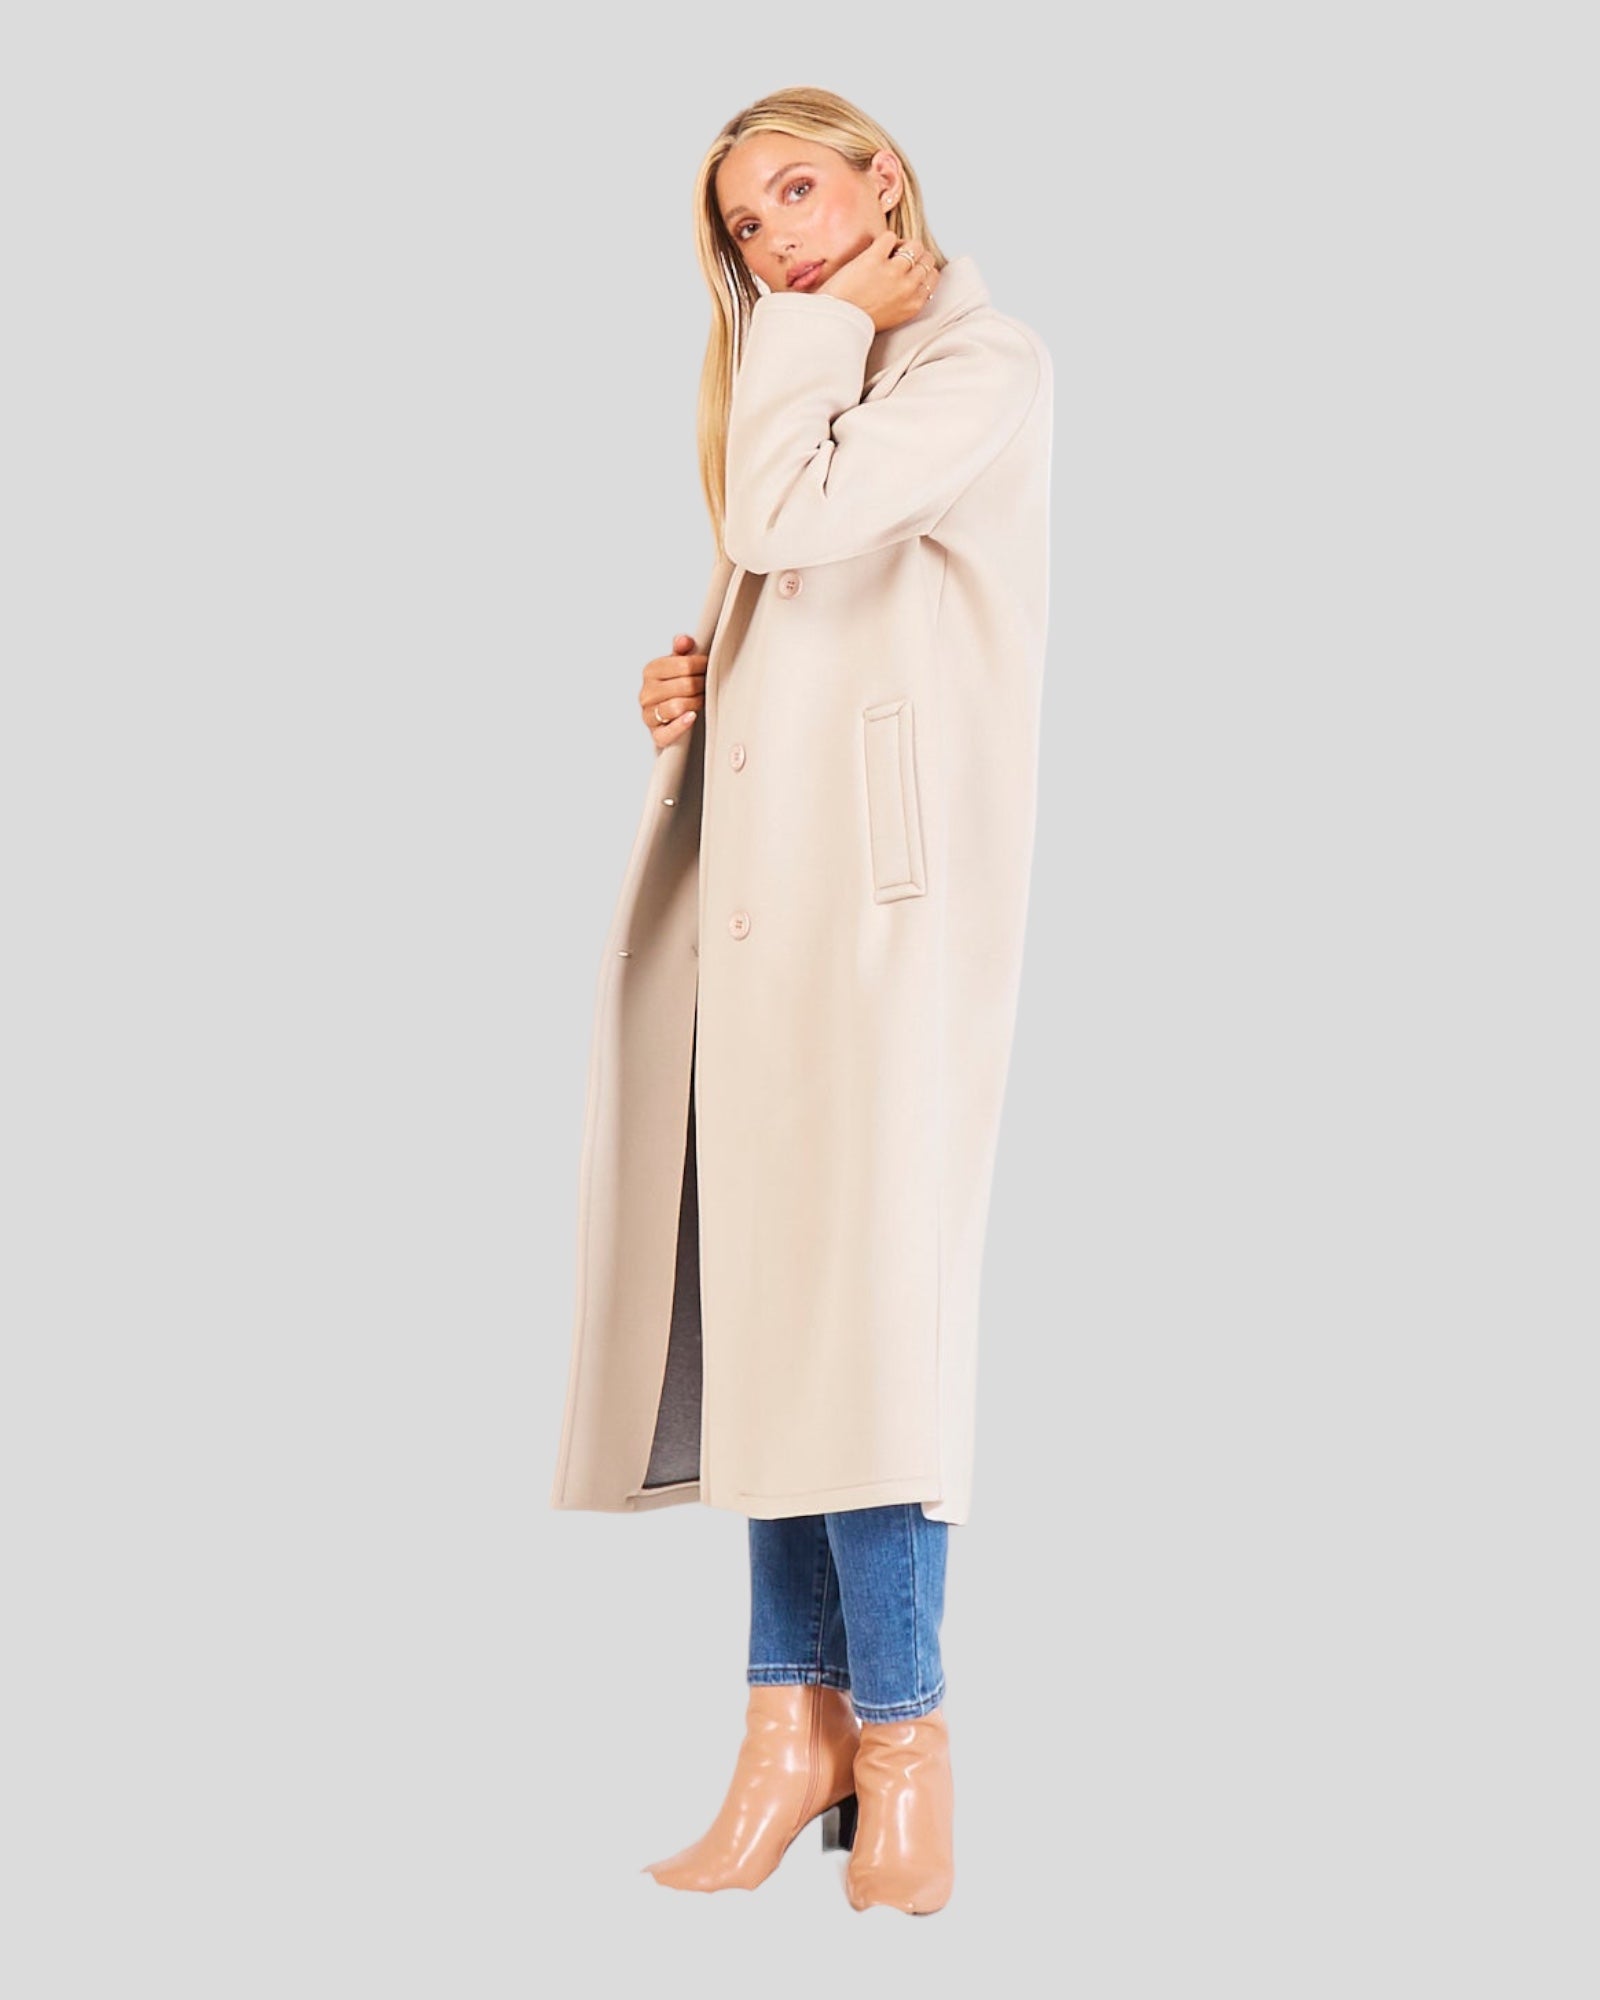 Classic Italian Long Overcoat. This sophisticated overcoat is characterized by a double-breasted design with six buttons and two convenient pockets. Crafted from a blend of faux wool and acrylic, it combines style and comfort seamlessly. Color Natural/Beige